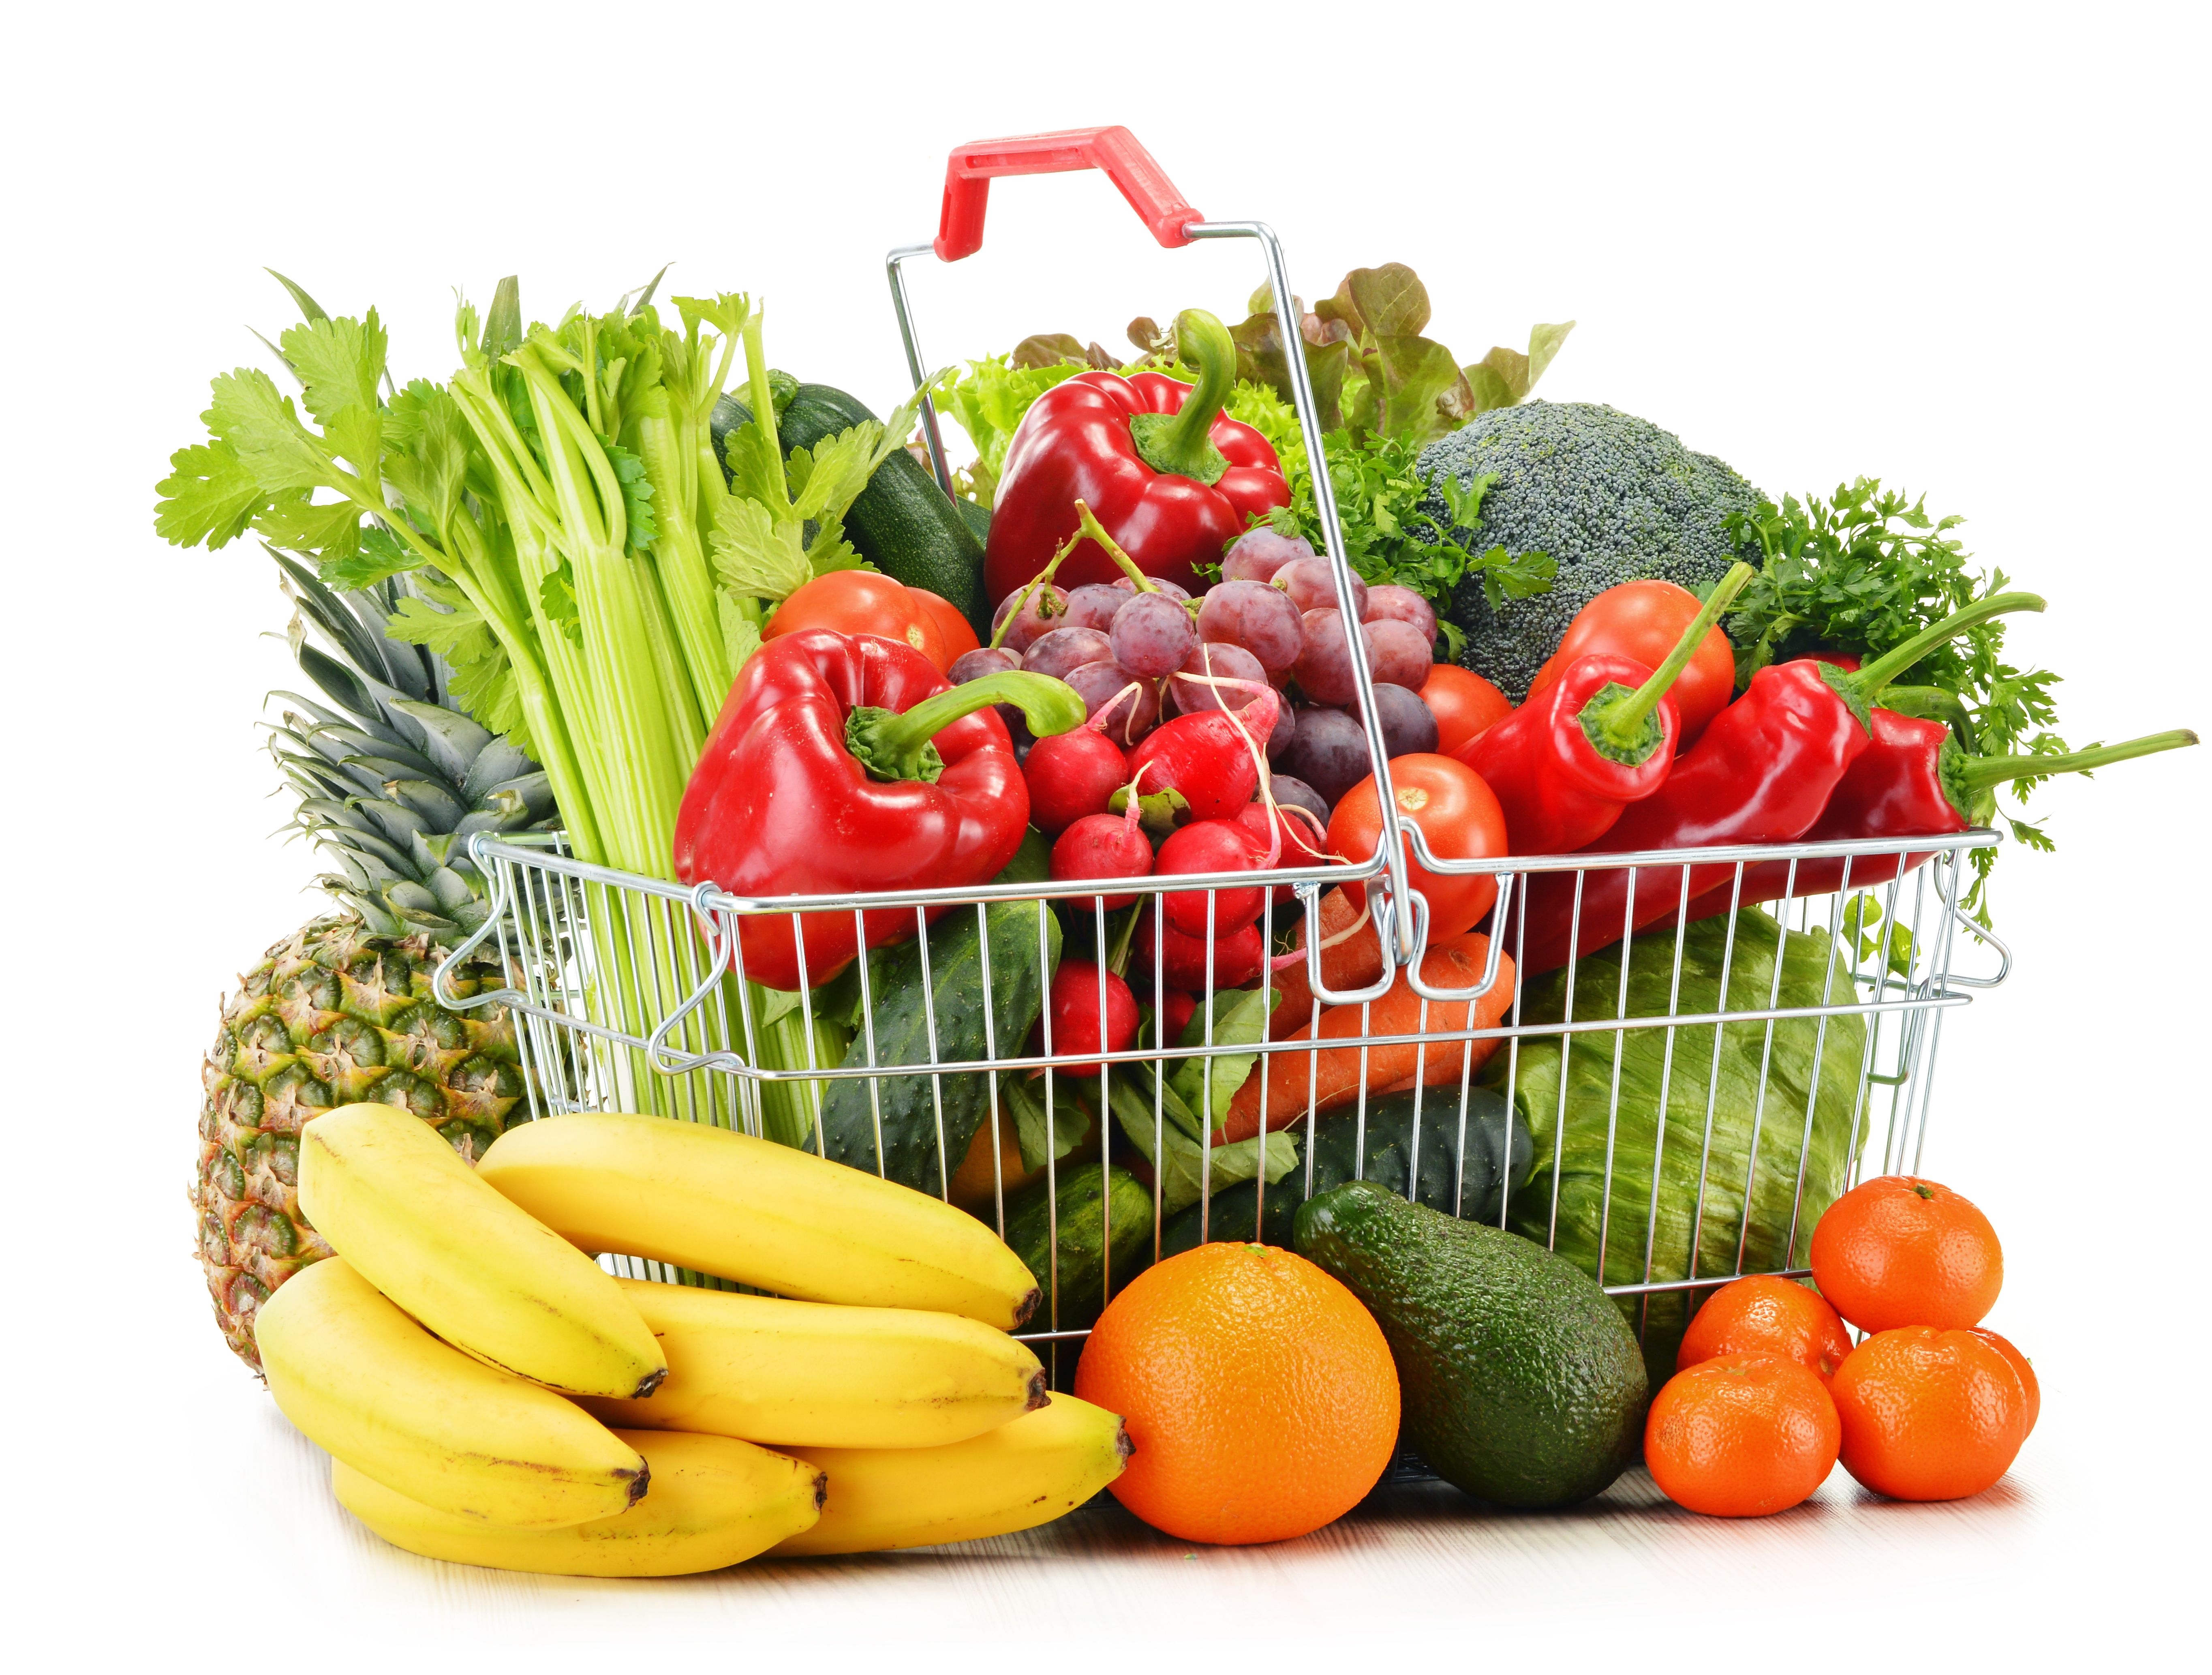 Iron basket with fresh vegetables and fruits on a white background